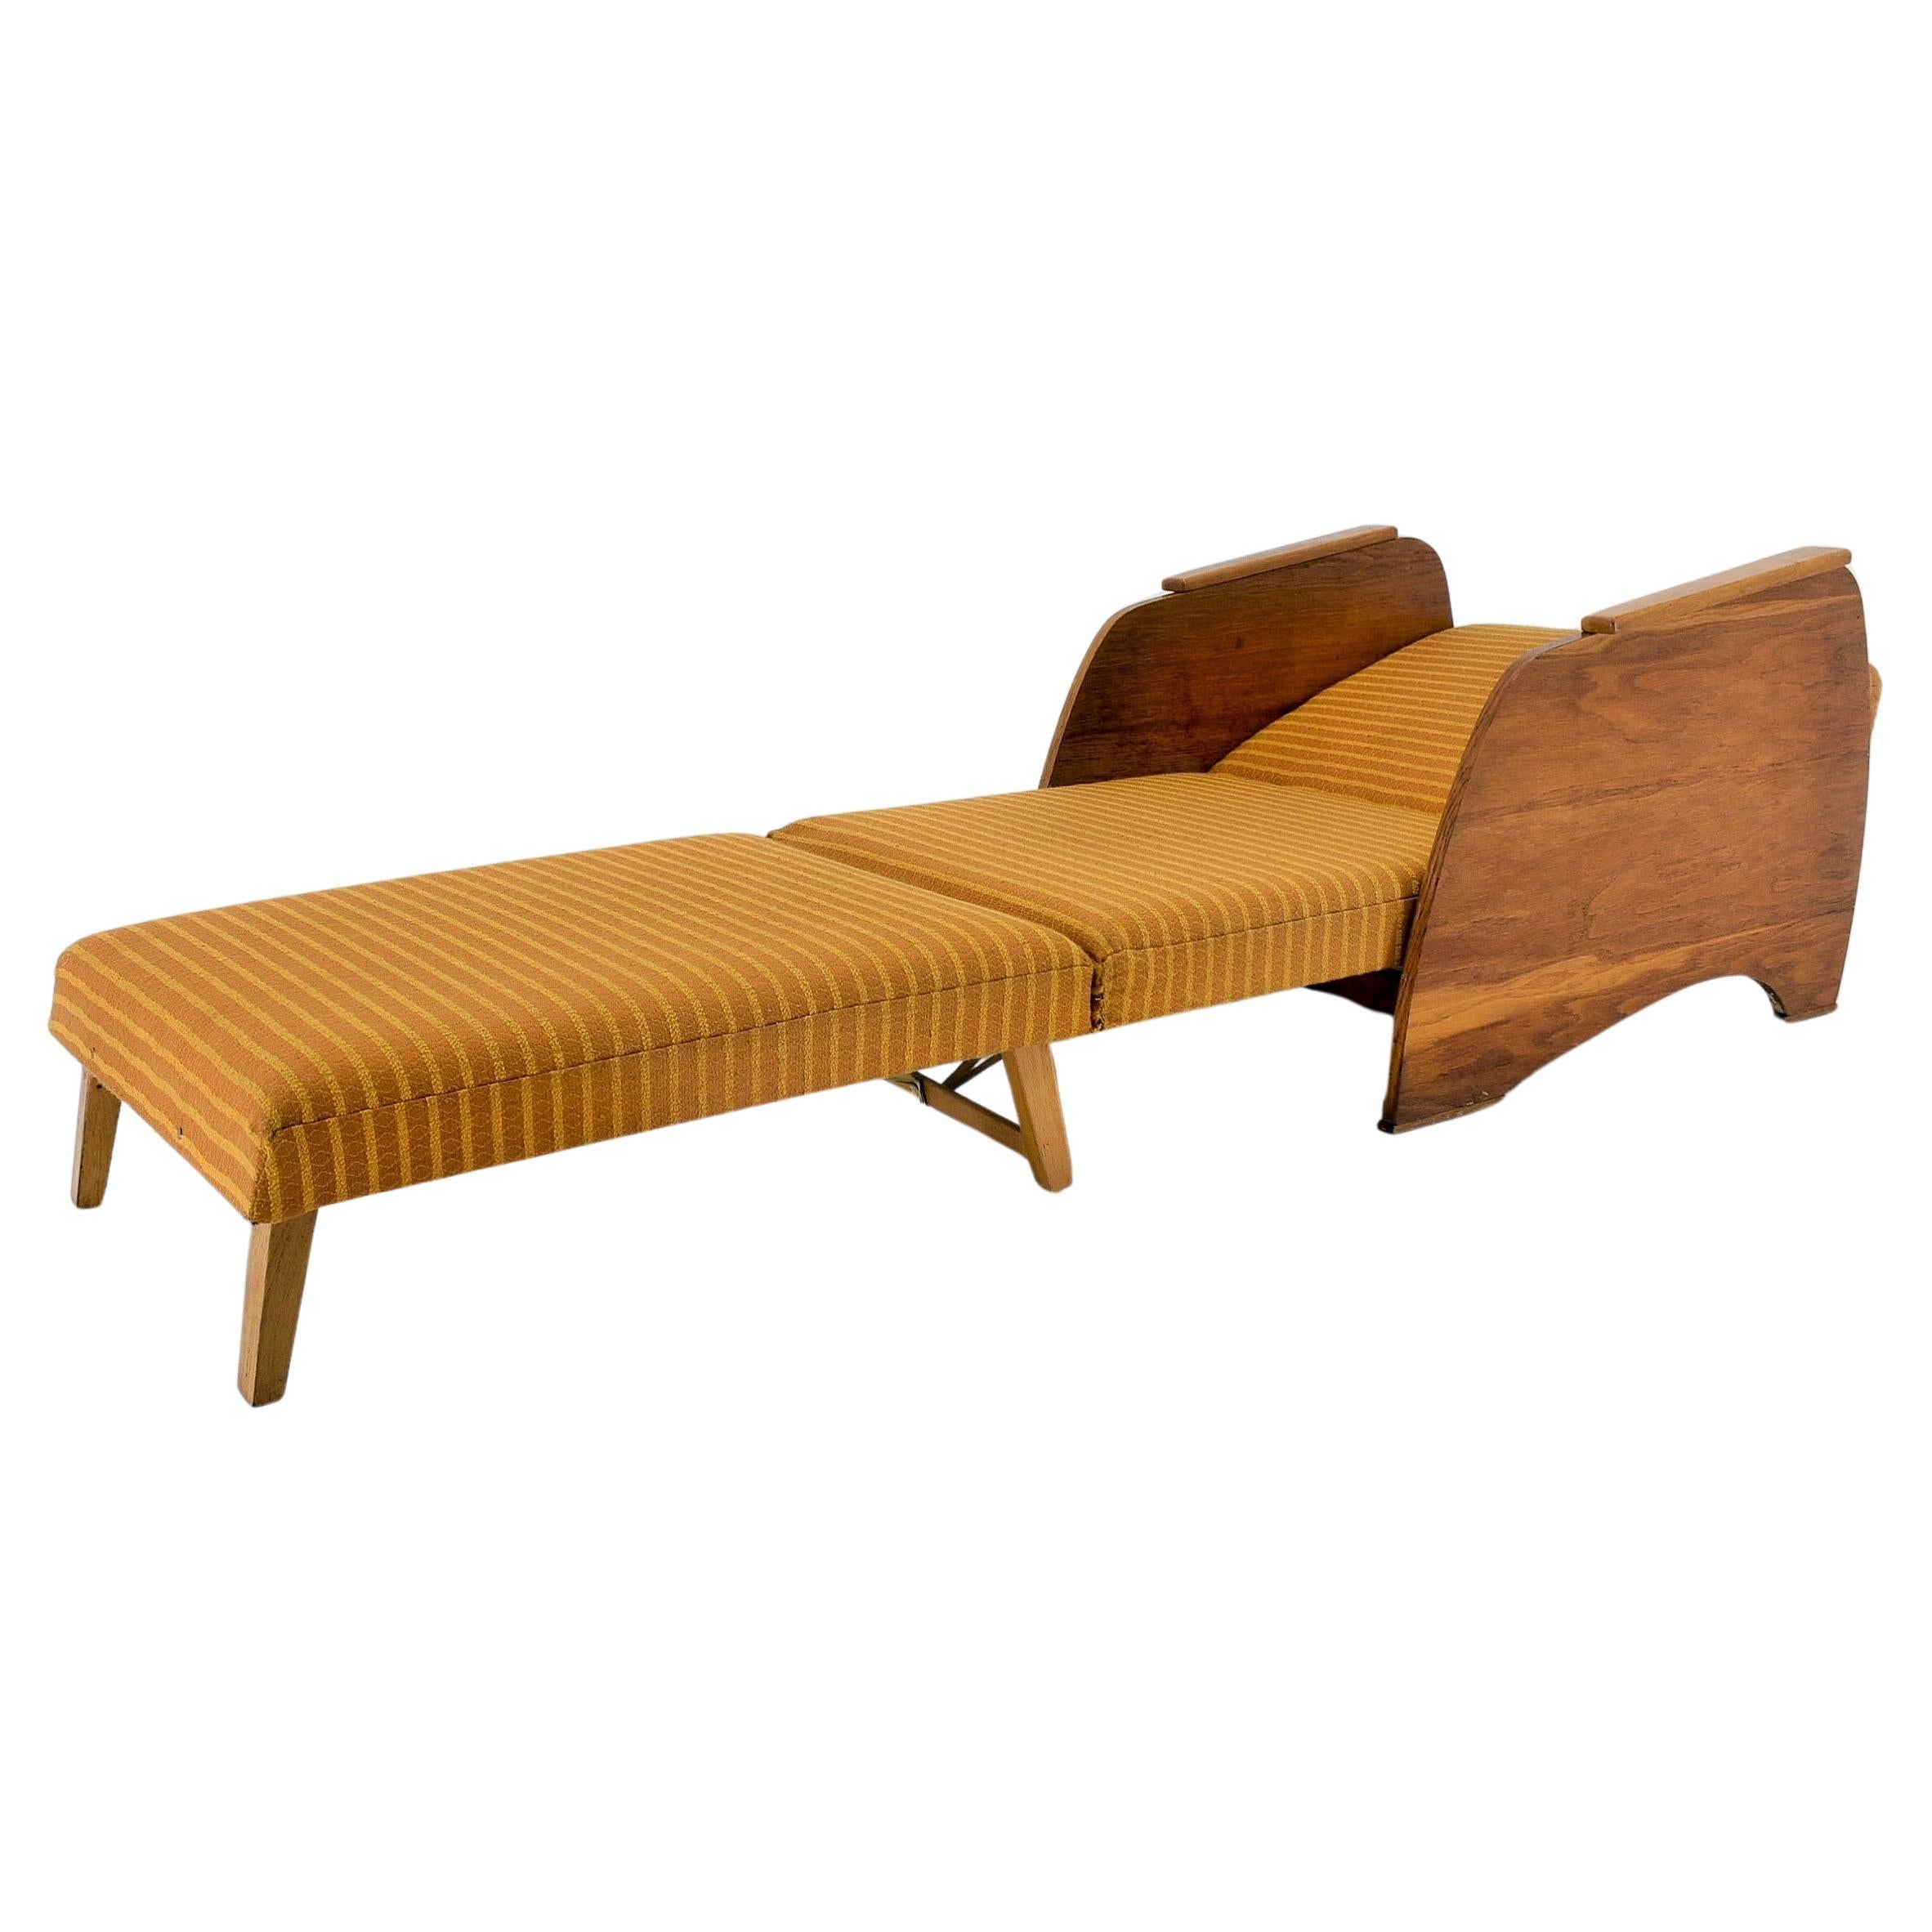 1960s Armchair Convertible to Daybed, Czechoslovakia For Sale